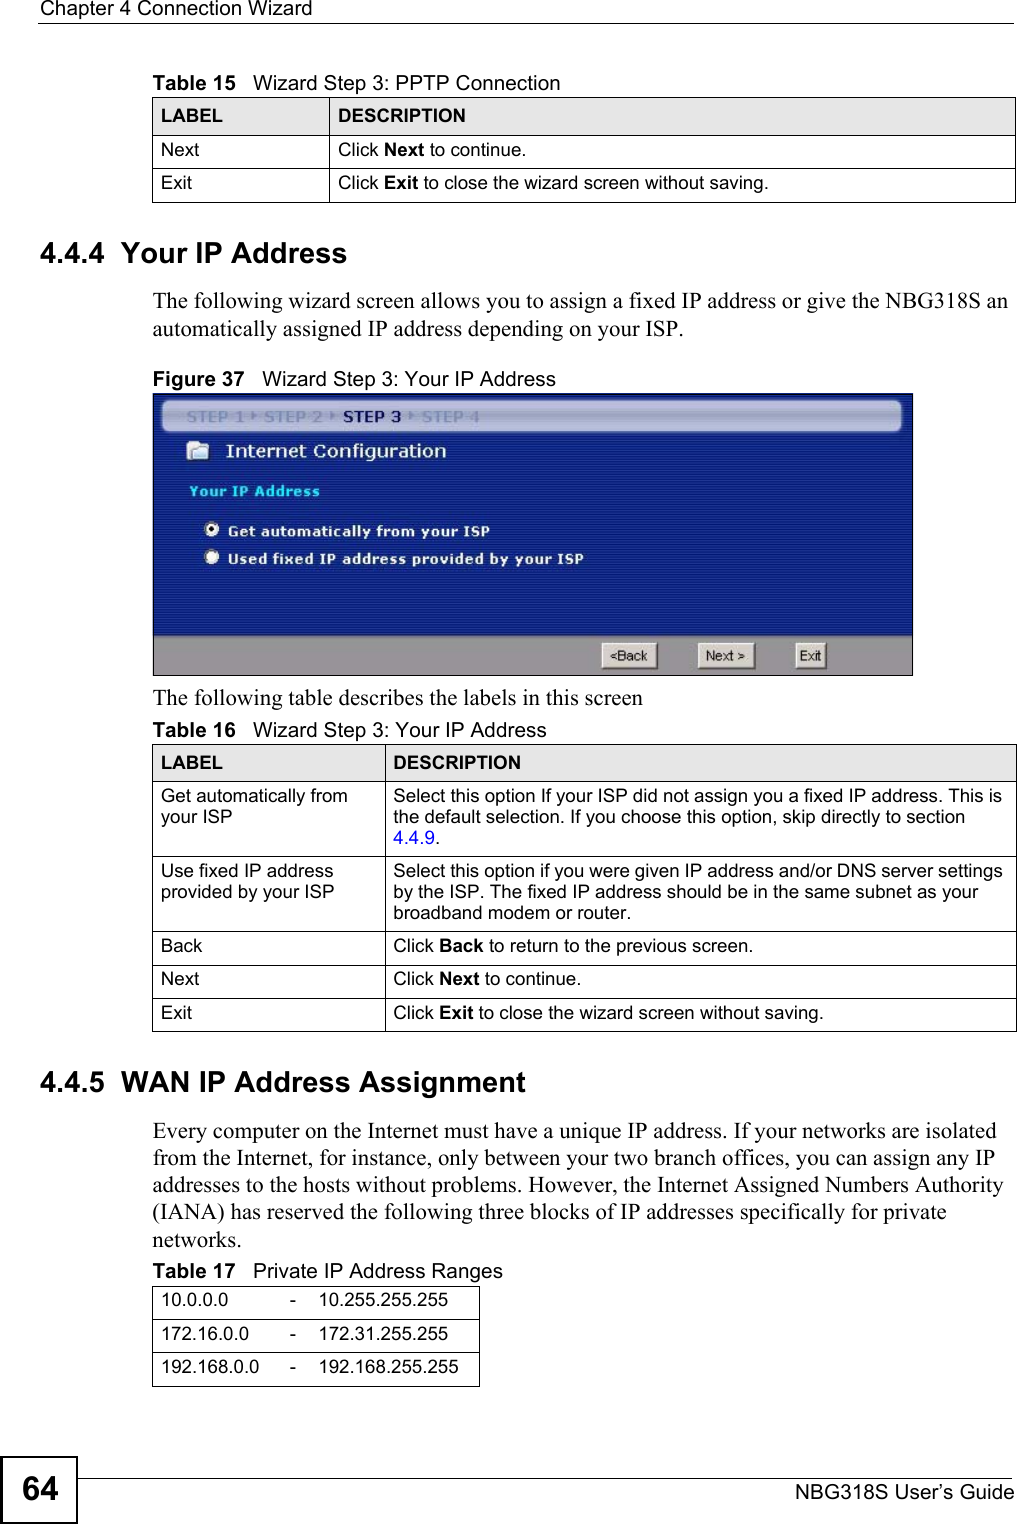 Chapter 4 Connection WizardNBG318S User’s Guide644.4.4  Your IP AddressThe following wizard screen allows you to assign a fixed IP address or give the NBG318S an automatically assigned IP address depending on your ISP.Figure 37   Wizard Step 3: Your IP AddressThe following table describes the labels in this screen4.4.5  WAN IP Address AssignmentEvery computer on the Internet must have a unique IP address. If your networks are isolated from the Internet, for instance, only between your two branch offices, you can assign any IP addresses to the hosts without problems. However, the Internet Assigned Numbers Authority (IANA) has reserved the following three blocks of IP addresses specifically for private networks.Next Click Next to continue. Exit Click Exit to close the wizard screen without saving.Table 15   Wizard Step 3: PPTP ConnectionLABEL DESCRIPTIONTable 16   Wizard Step 3: Your IP AddressLABEL DESCRIPTIONGet automatically from your ISP Select this option If your ISP did not assign you a fixed IP address. This is the default selection. If you choose this option, skip directly to section 4.4.9.Use fixed IP address provided by your ISPSelect this option if you were given IP address and/or DNS server settings by the ISP. The fixed IP address should be in the same subnet as your broadband modem or router. Back Click Back to return to the previous screen.Next Click Next to continue. Exit Click Exit to close the wizard screen without saving.Table 17   Private IP Address Ranges10.0.0.0 -10.255.255.255172.16.0.0 -172.31.255.255192.168.0.0 -192.168.255.255